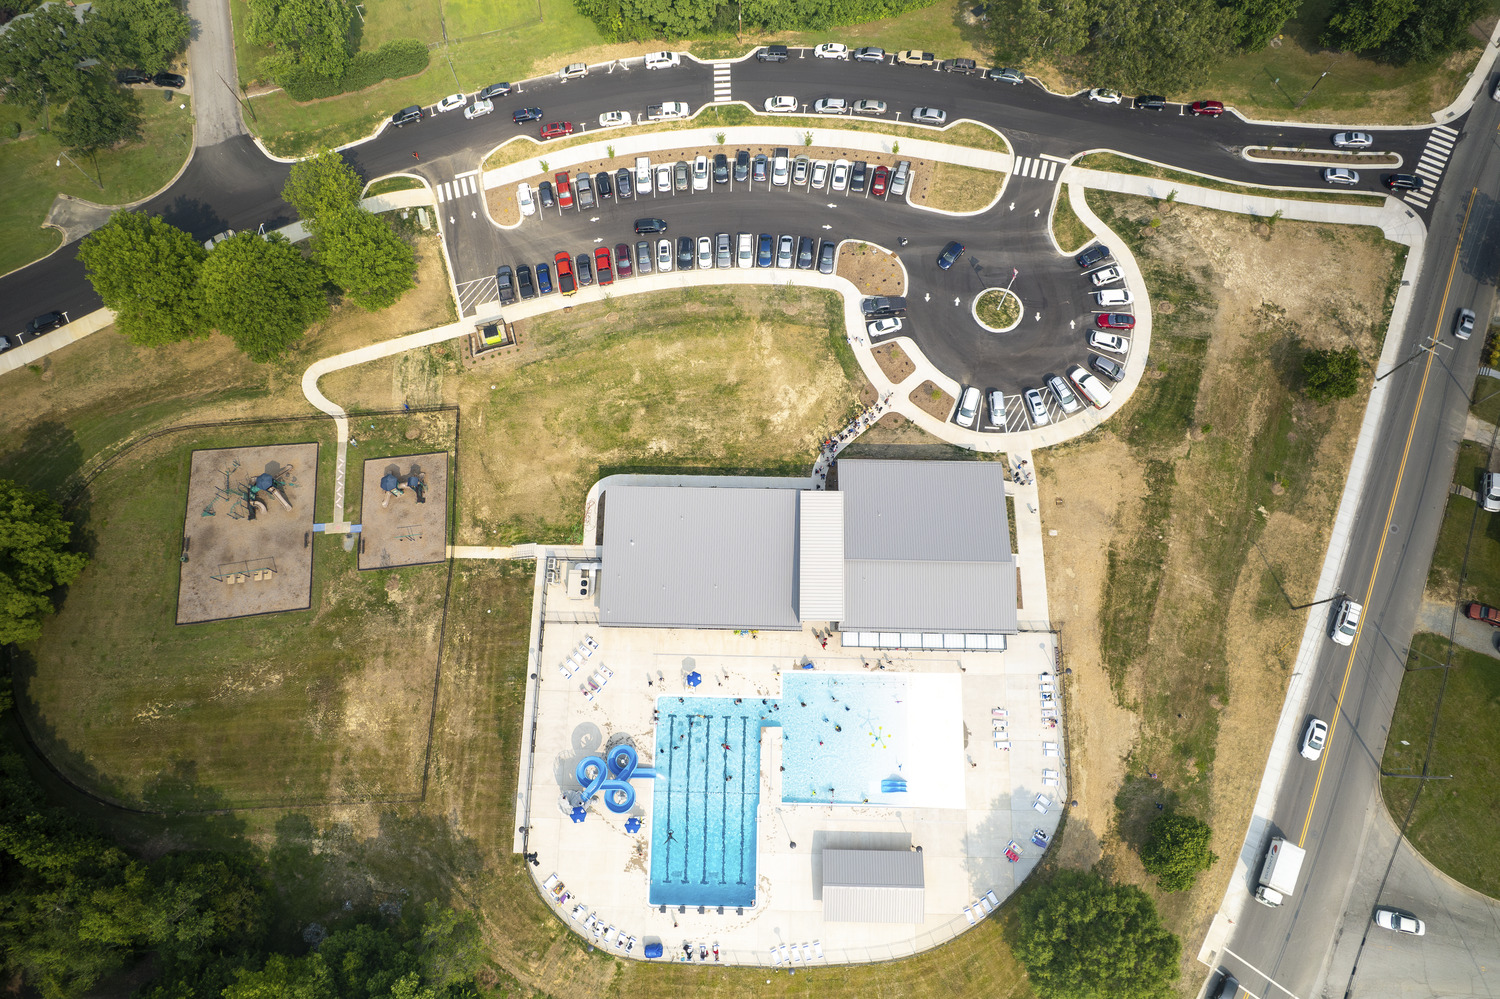 An aerial view of the Thomasville Aquatic and Community Center is shown. Two pools can be seen next to two buildings. There is a parking lot pictured that is full of cars. 